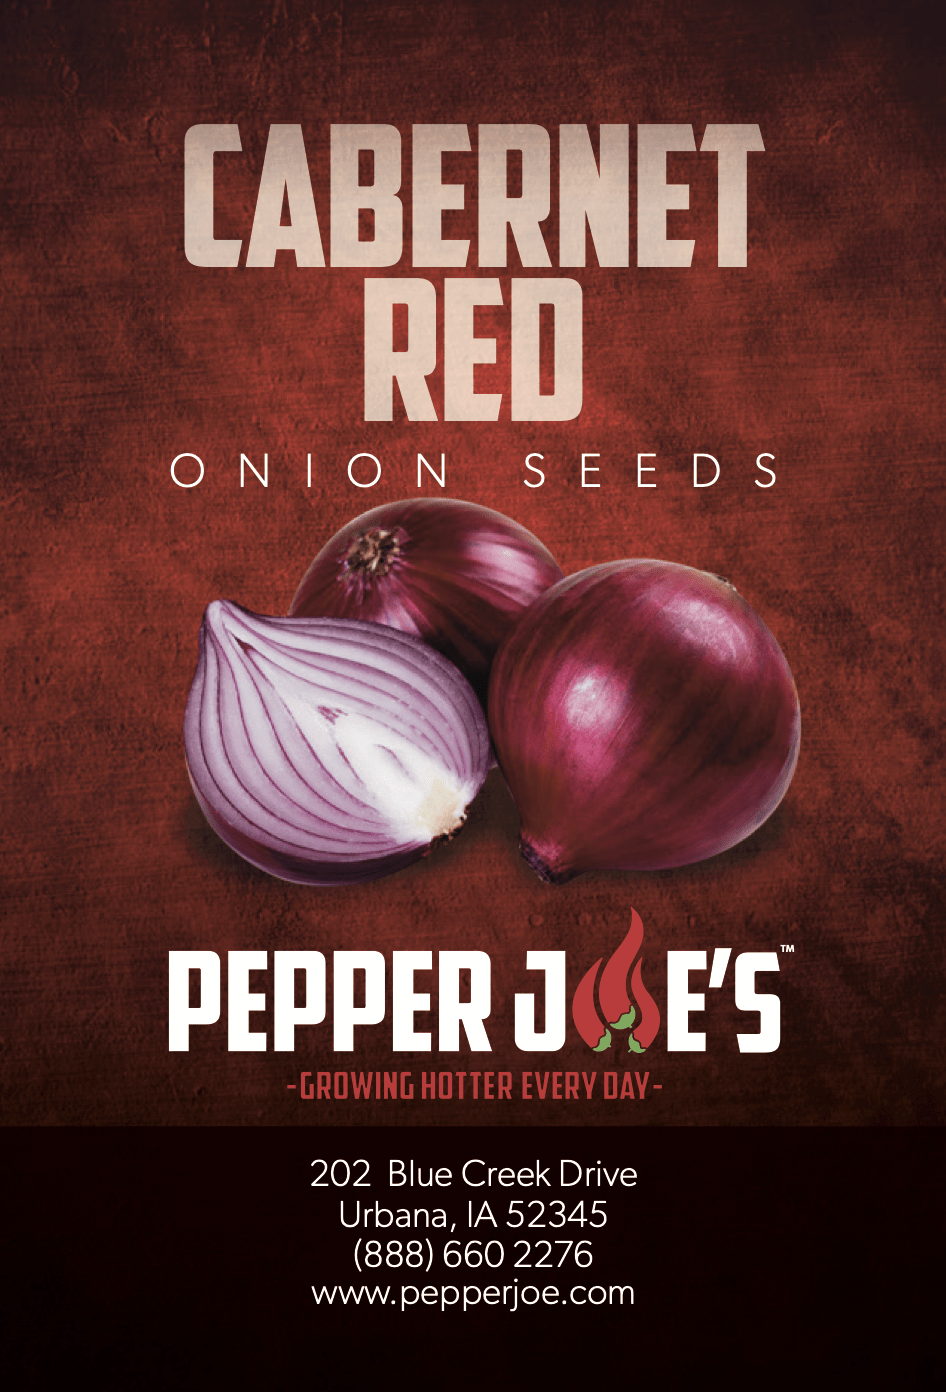 Cabernet Red Onion Seeds